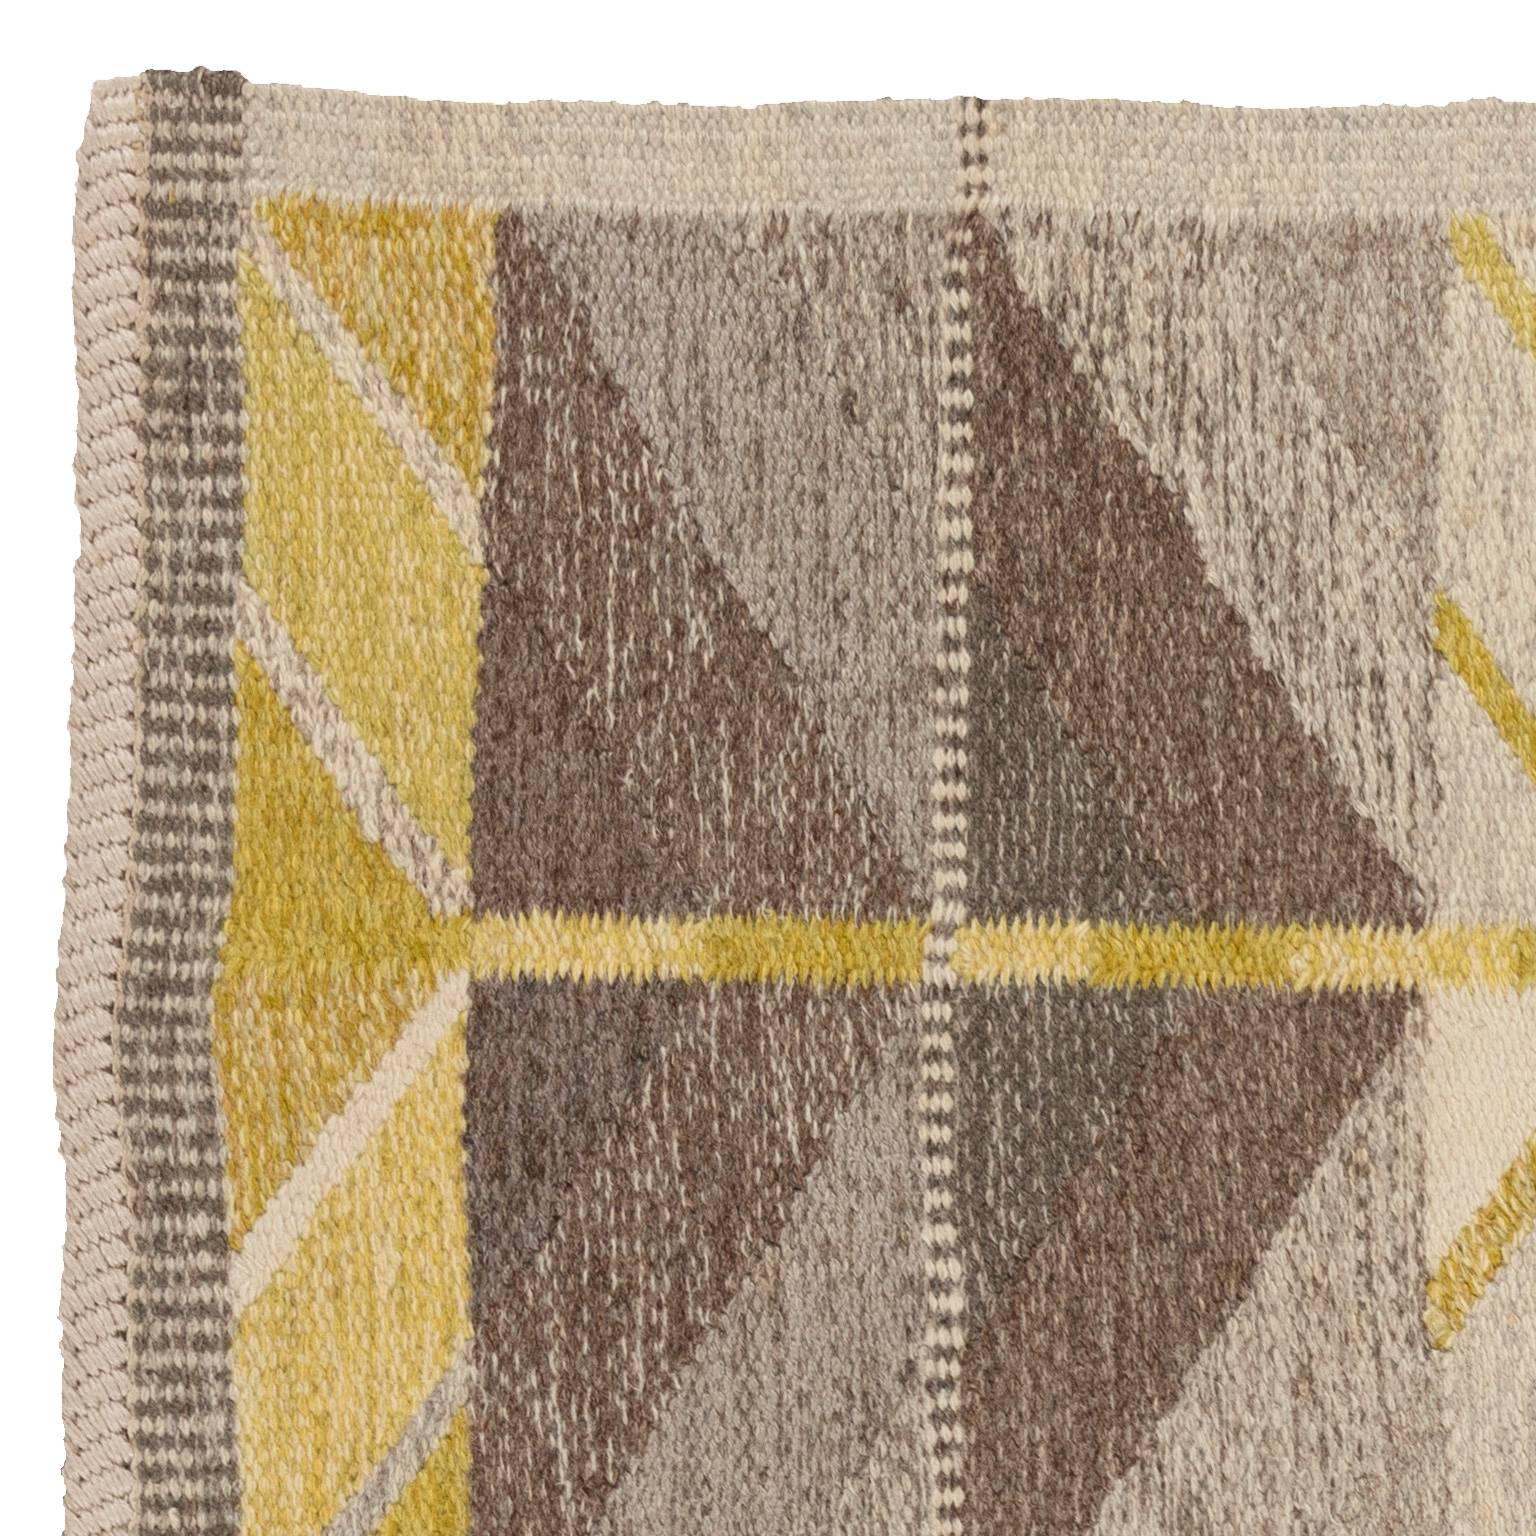 This iconic vintage Swedish flat-weave rug designed by Ingrid Dessau (1923-2000) features an all-over design of geometric shapes and lines in varying shades of grey, with yellow accents. The rug is a handwoven art-piece in an excellent condition.